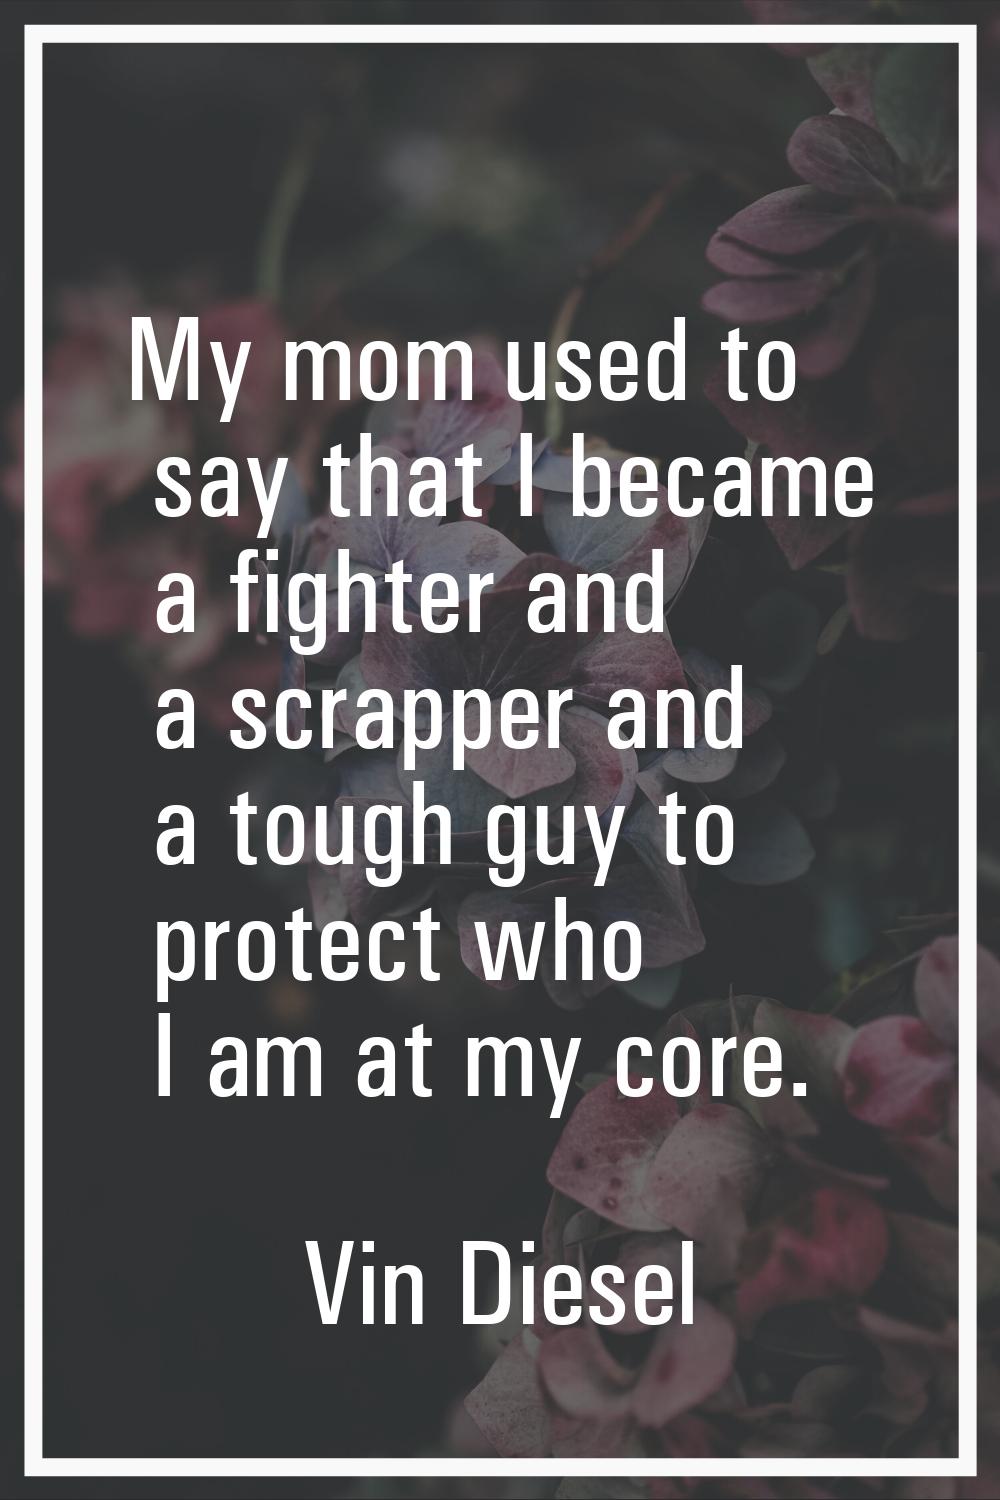 My mom used to say that I became a fighter and a scrapper and a tough guy to protect who I am at my